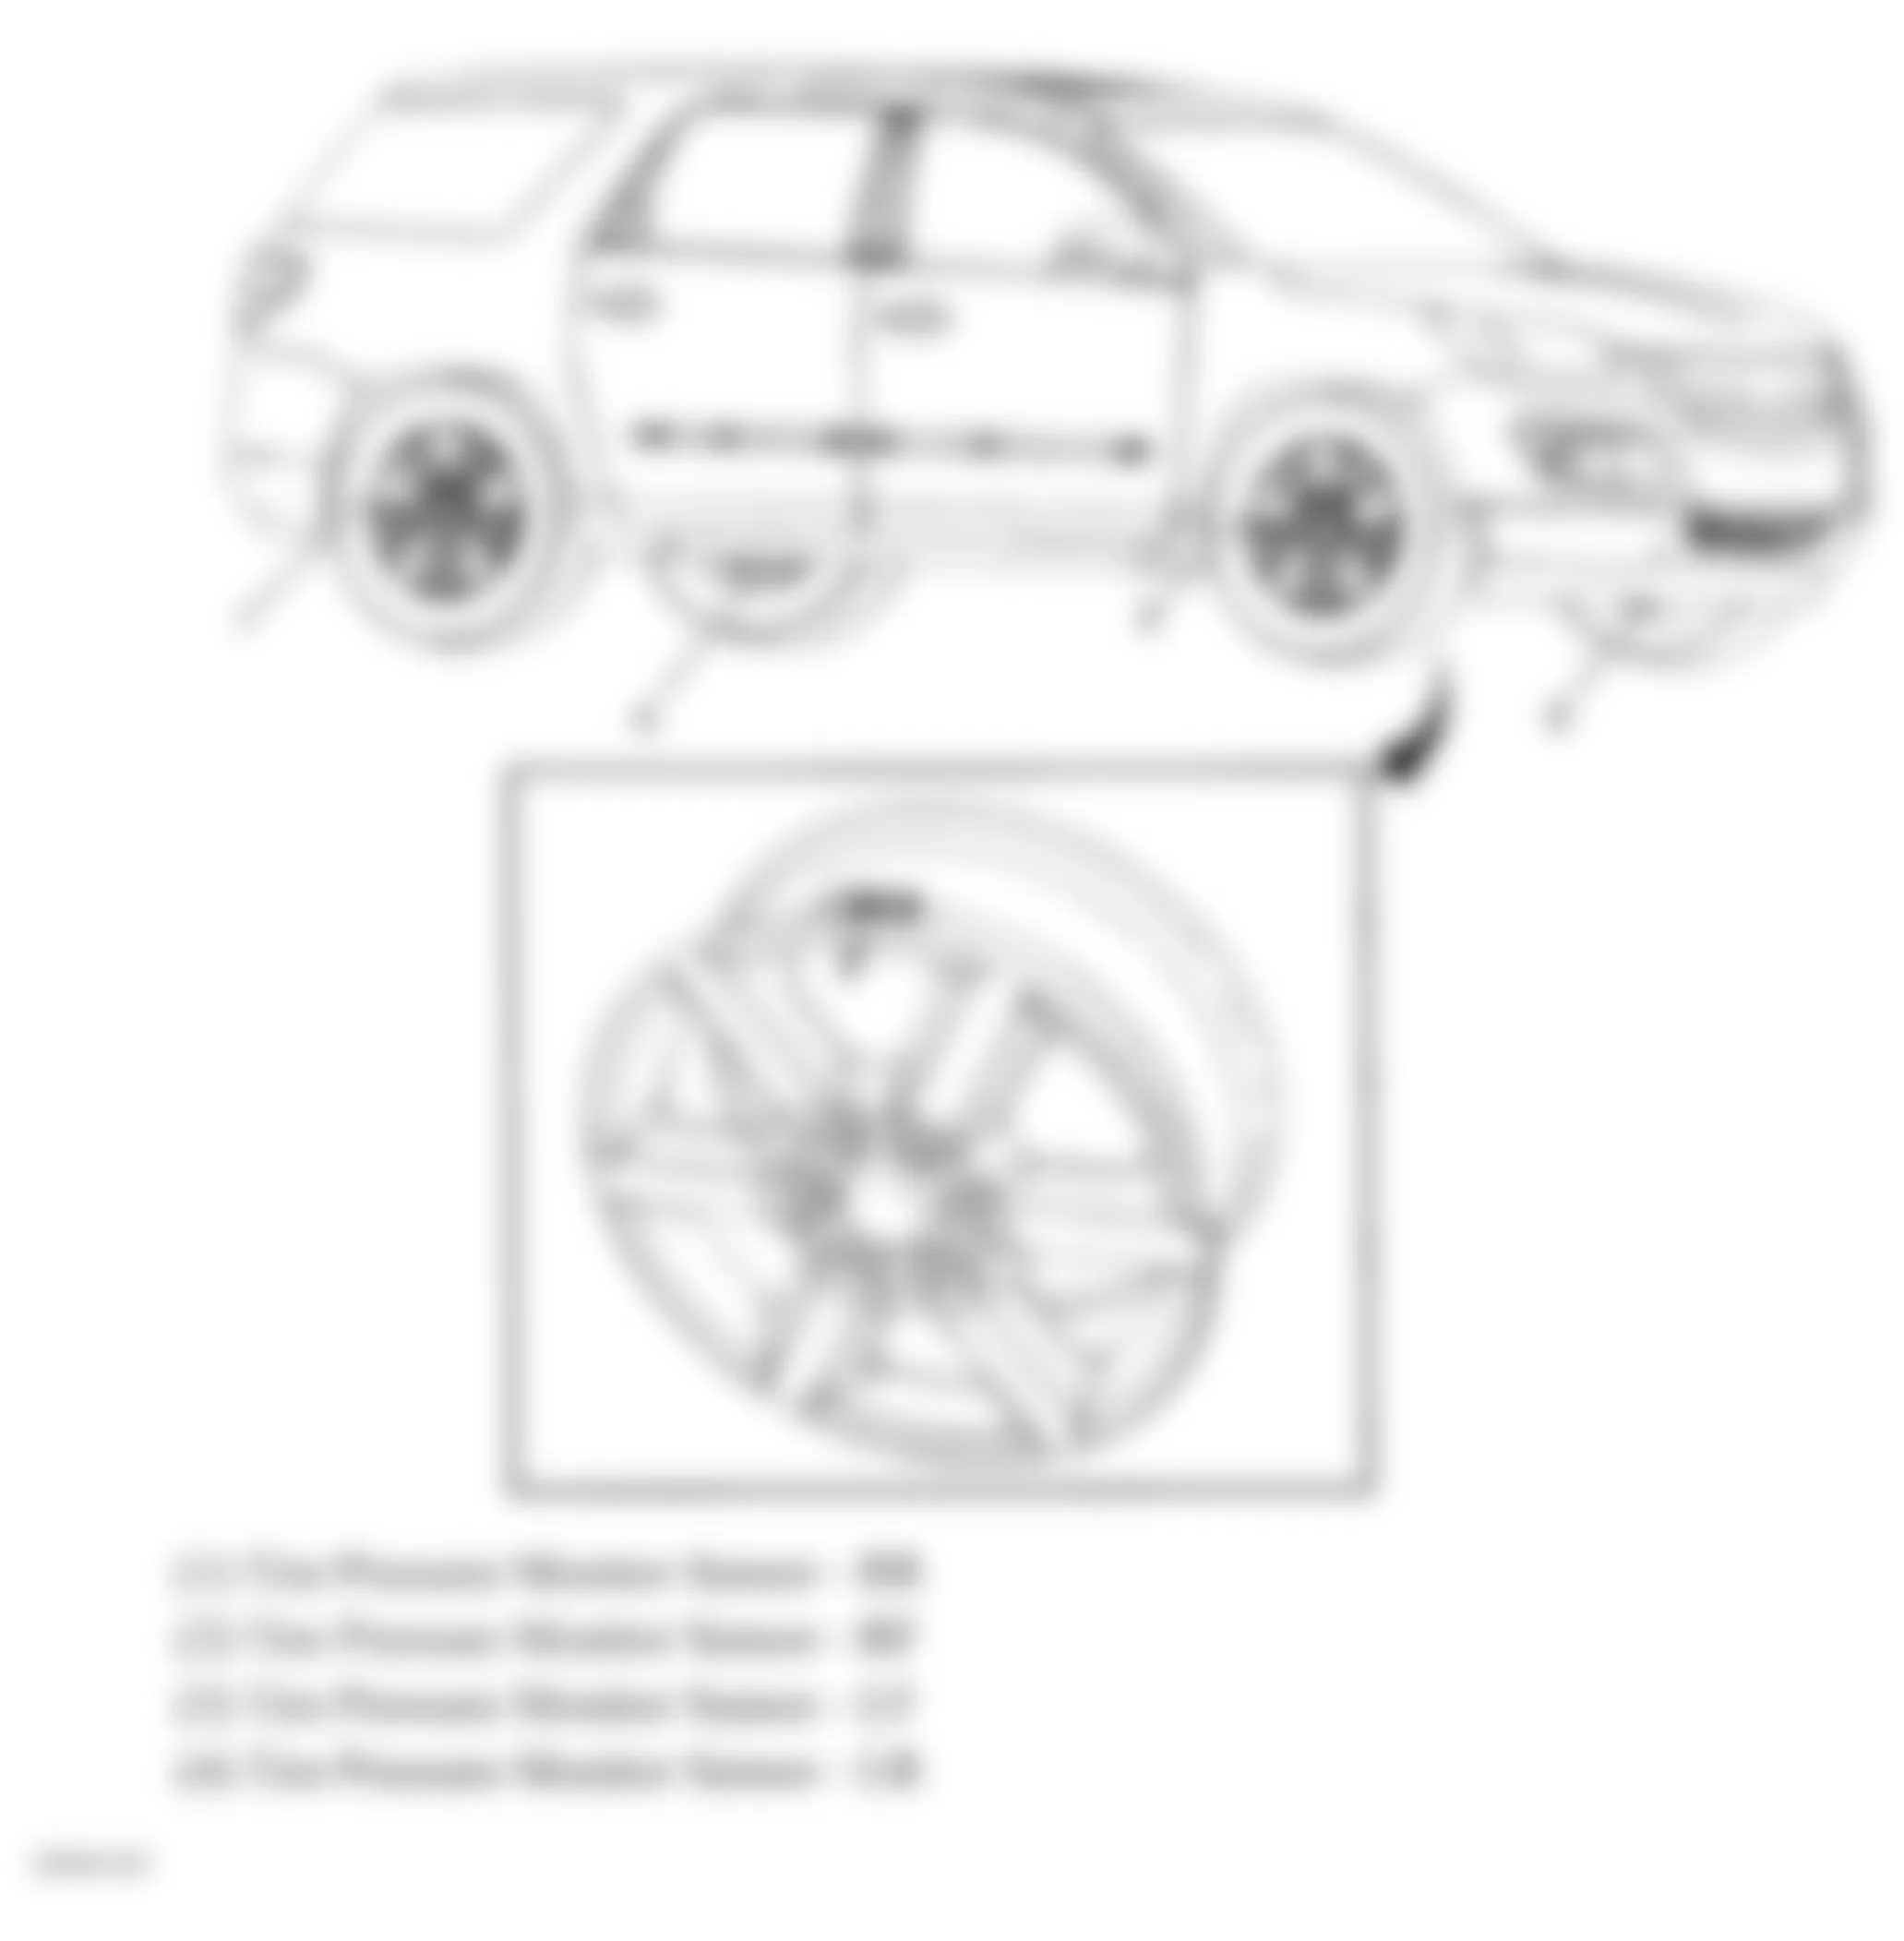 GMC Acadia SLT 2009 - Component Locations -  Vehicle Tire Overview